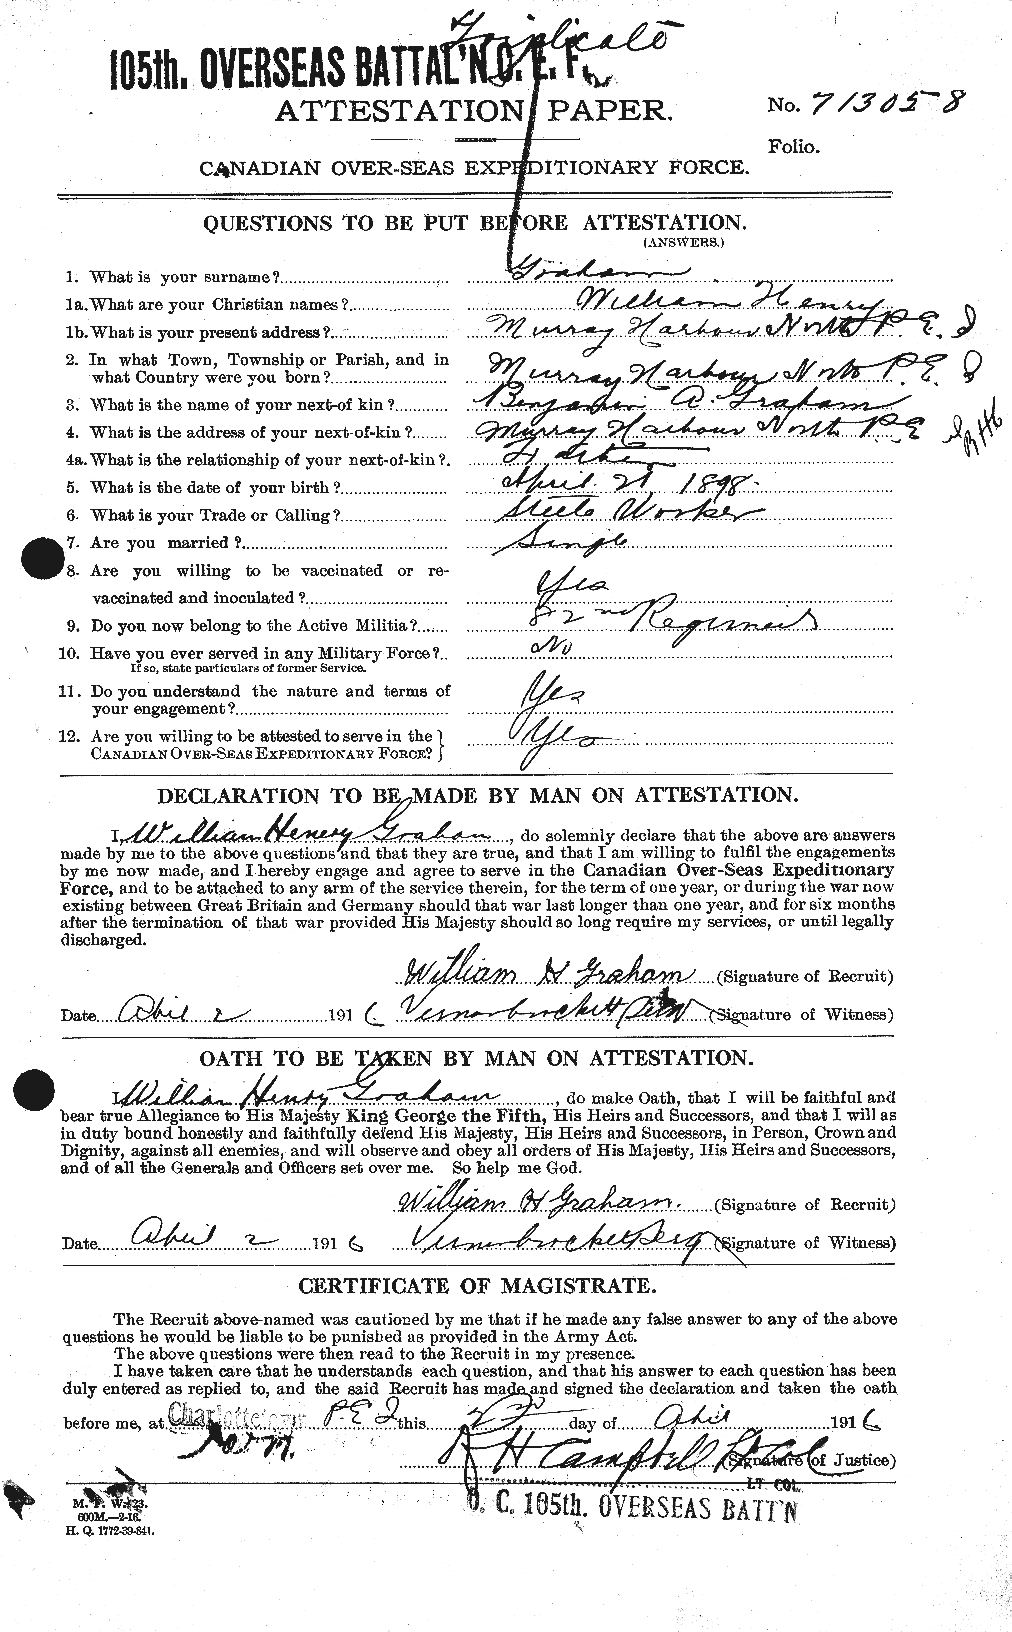 Personnel Records of the First World War - CEF 358003a